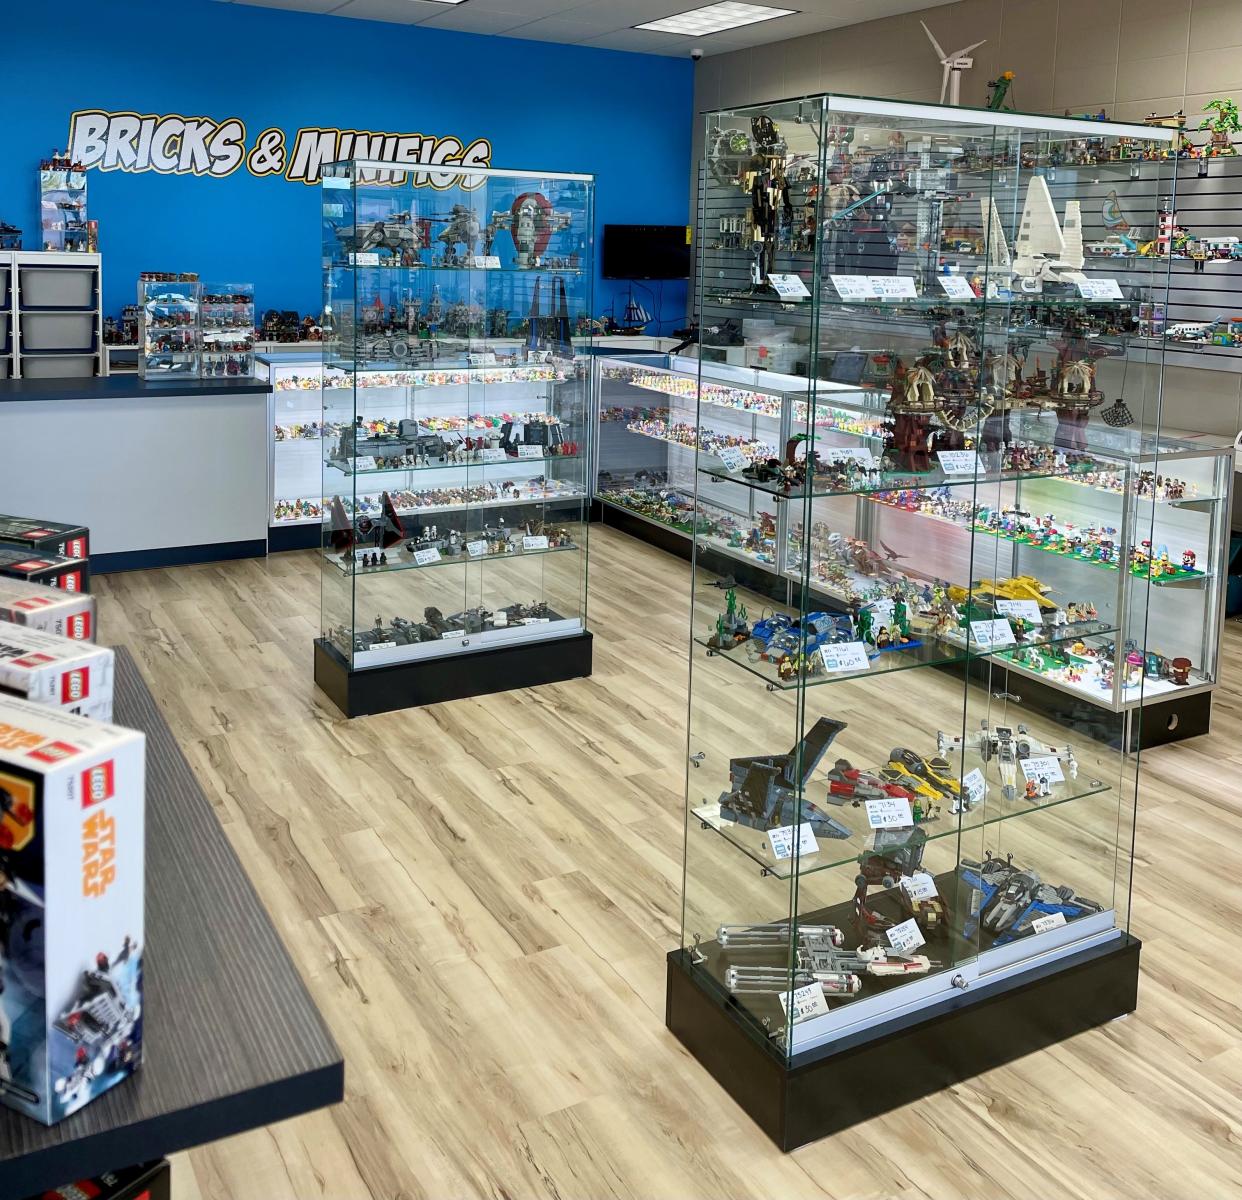 The grand opening for Bricks & Minifigs Sioux Falls is Saturday, May 21. The franchise is an authorized Lego reseller that sells, buys and trades merchandise.